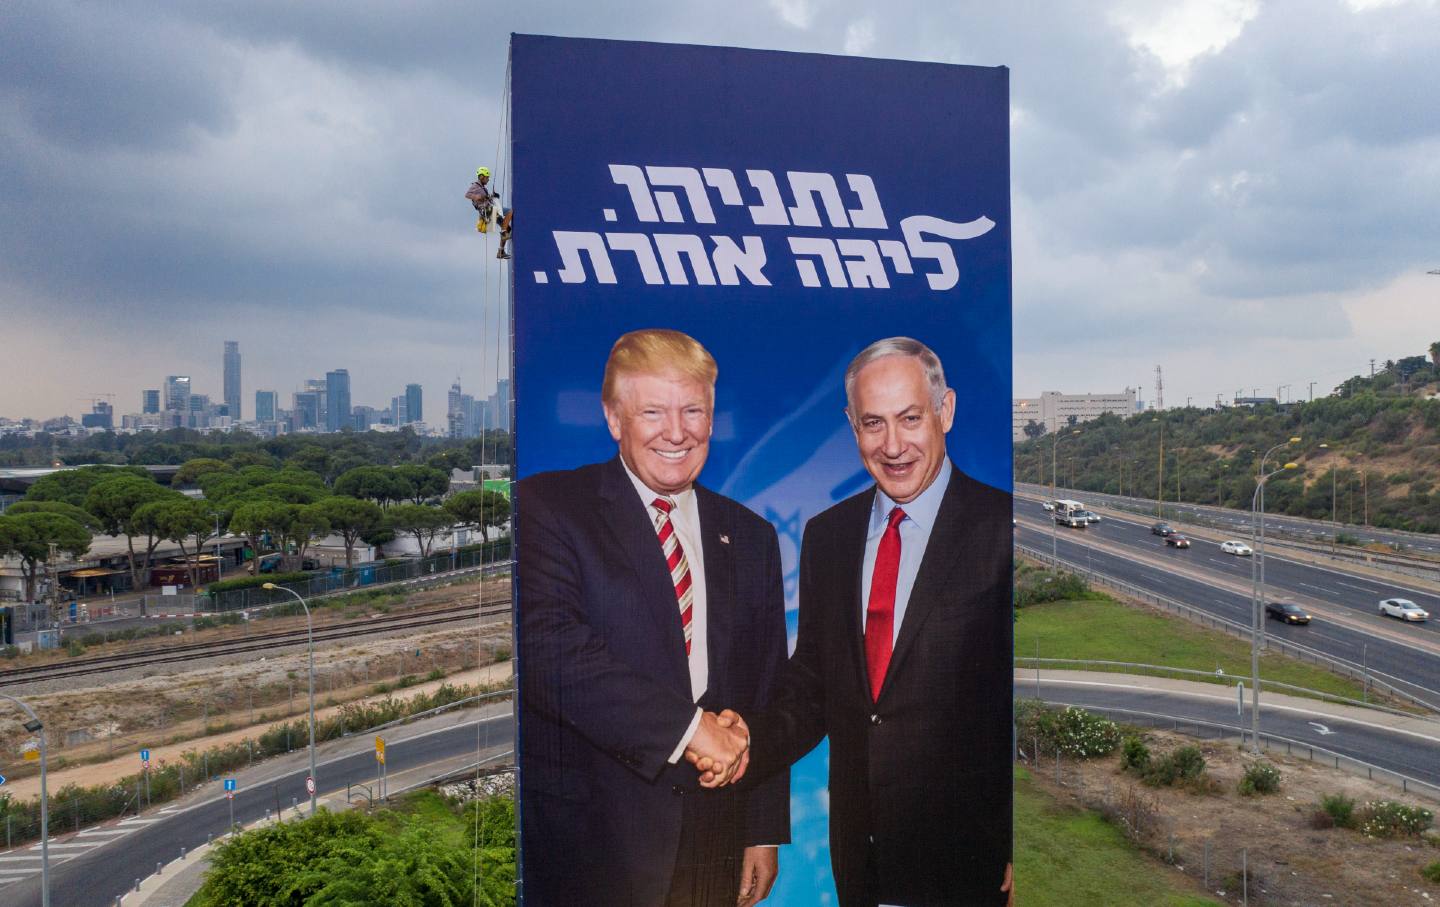 A worker hangs an election campaign billboard of the Likud party showing former US President Donald Trump, left, and Israeli Prime Minister Benjamin Netanyahu in Tel Aviv on September 8, 2019.